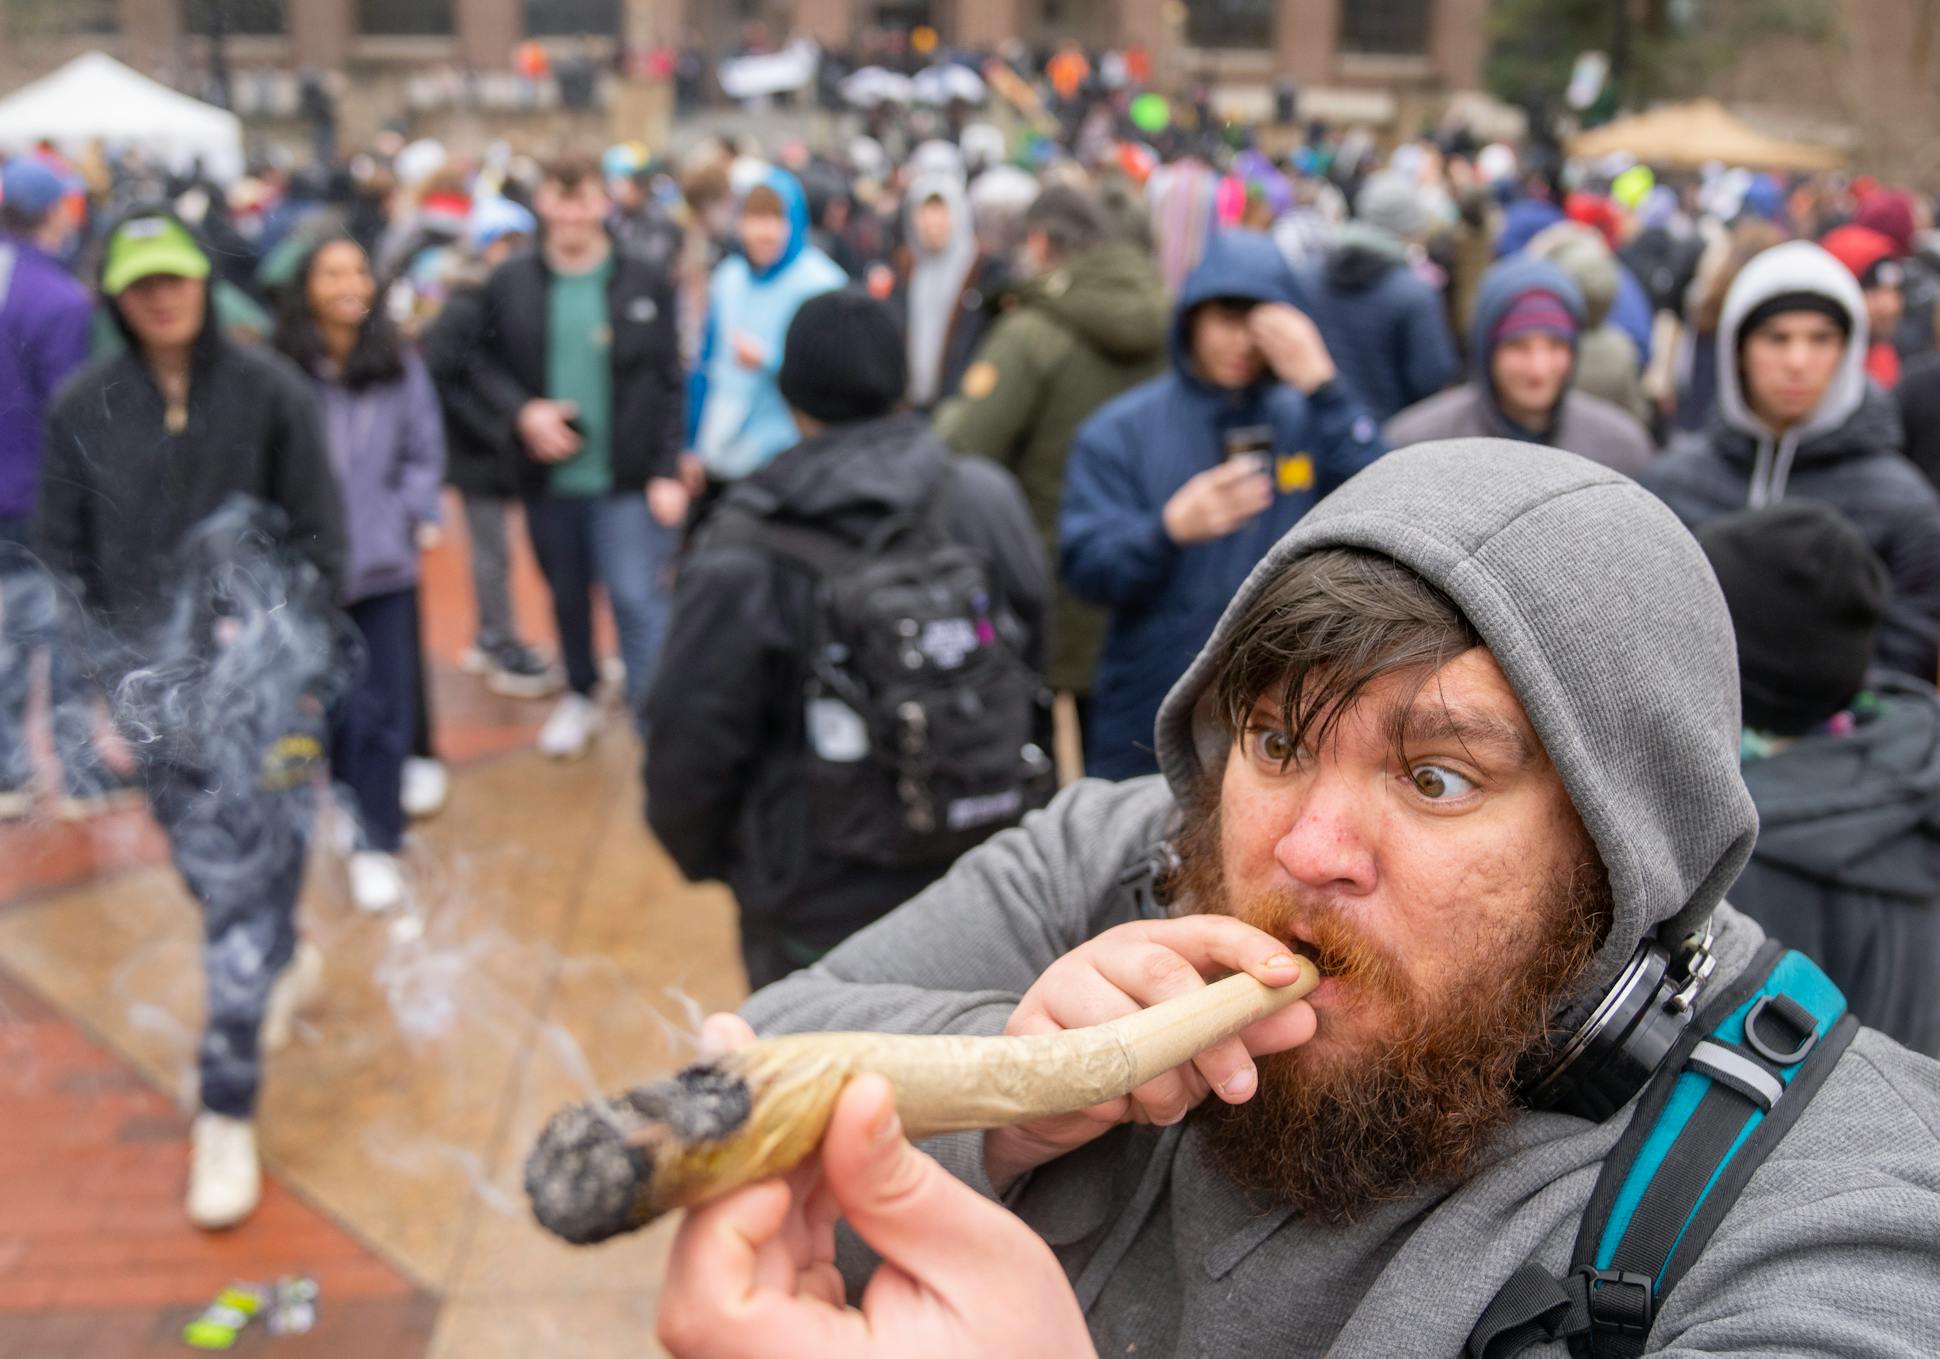 Jonathan “Hagrid” Weddle takes a hit off an 18-inch joint during Hash Bash on the University of Michigan campus in Ann Arbor on April 1. The annual pot party and political rally celebrated marijuana legalization's trailblazing activists this year.